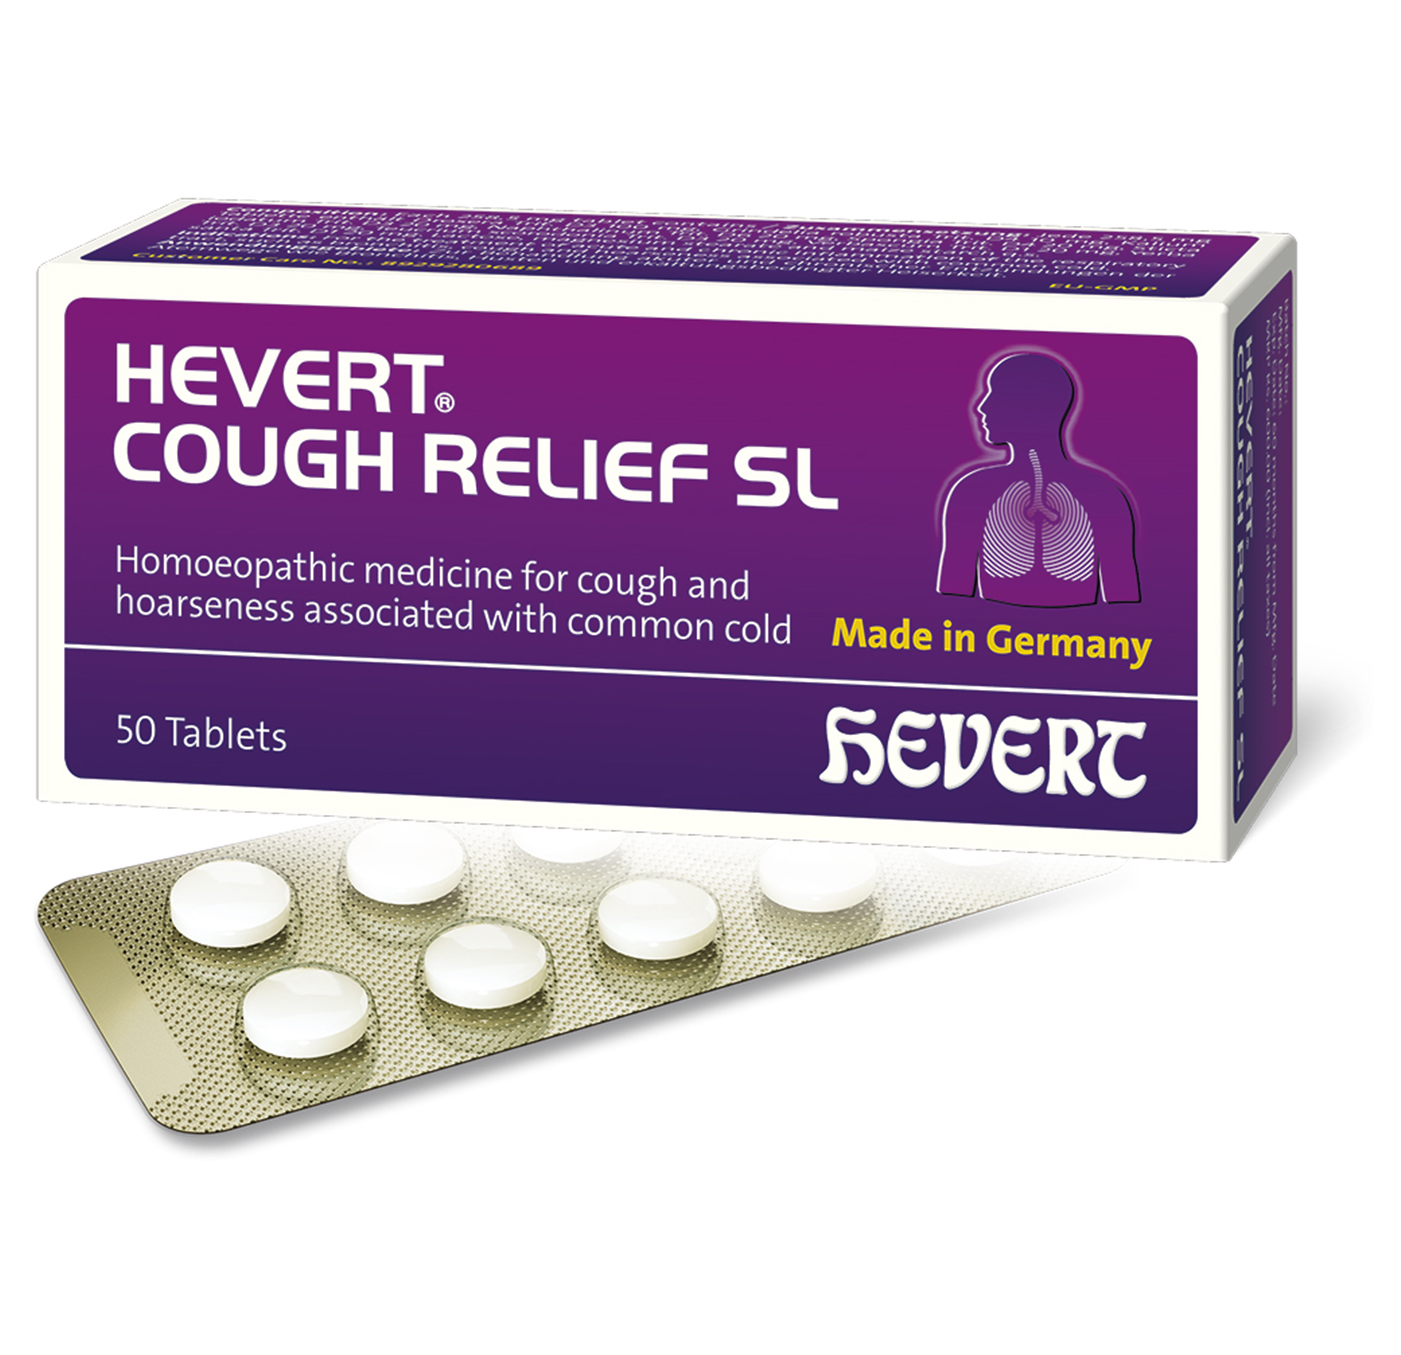 Hevert Cough Relief meiacine style=